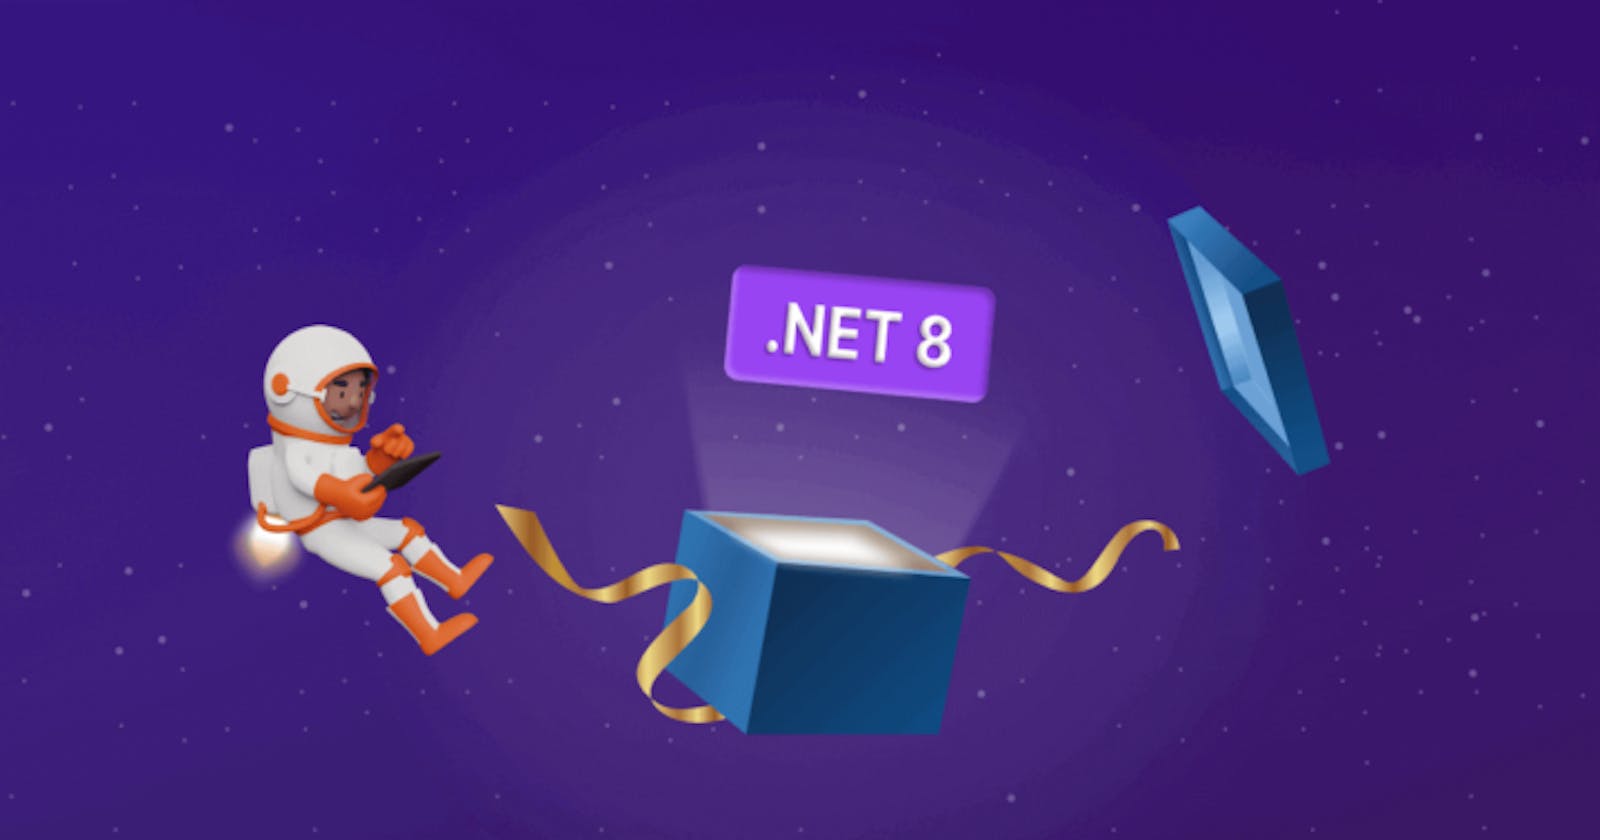 What’s New in .NET 8 for Developers?